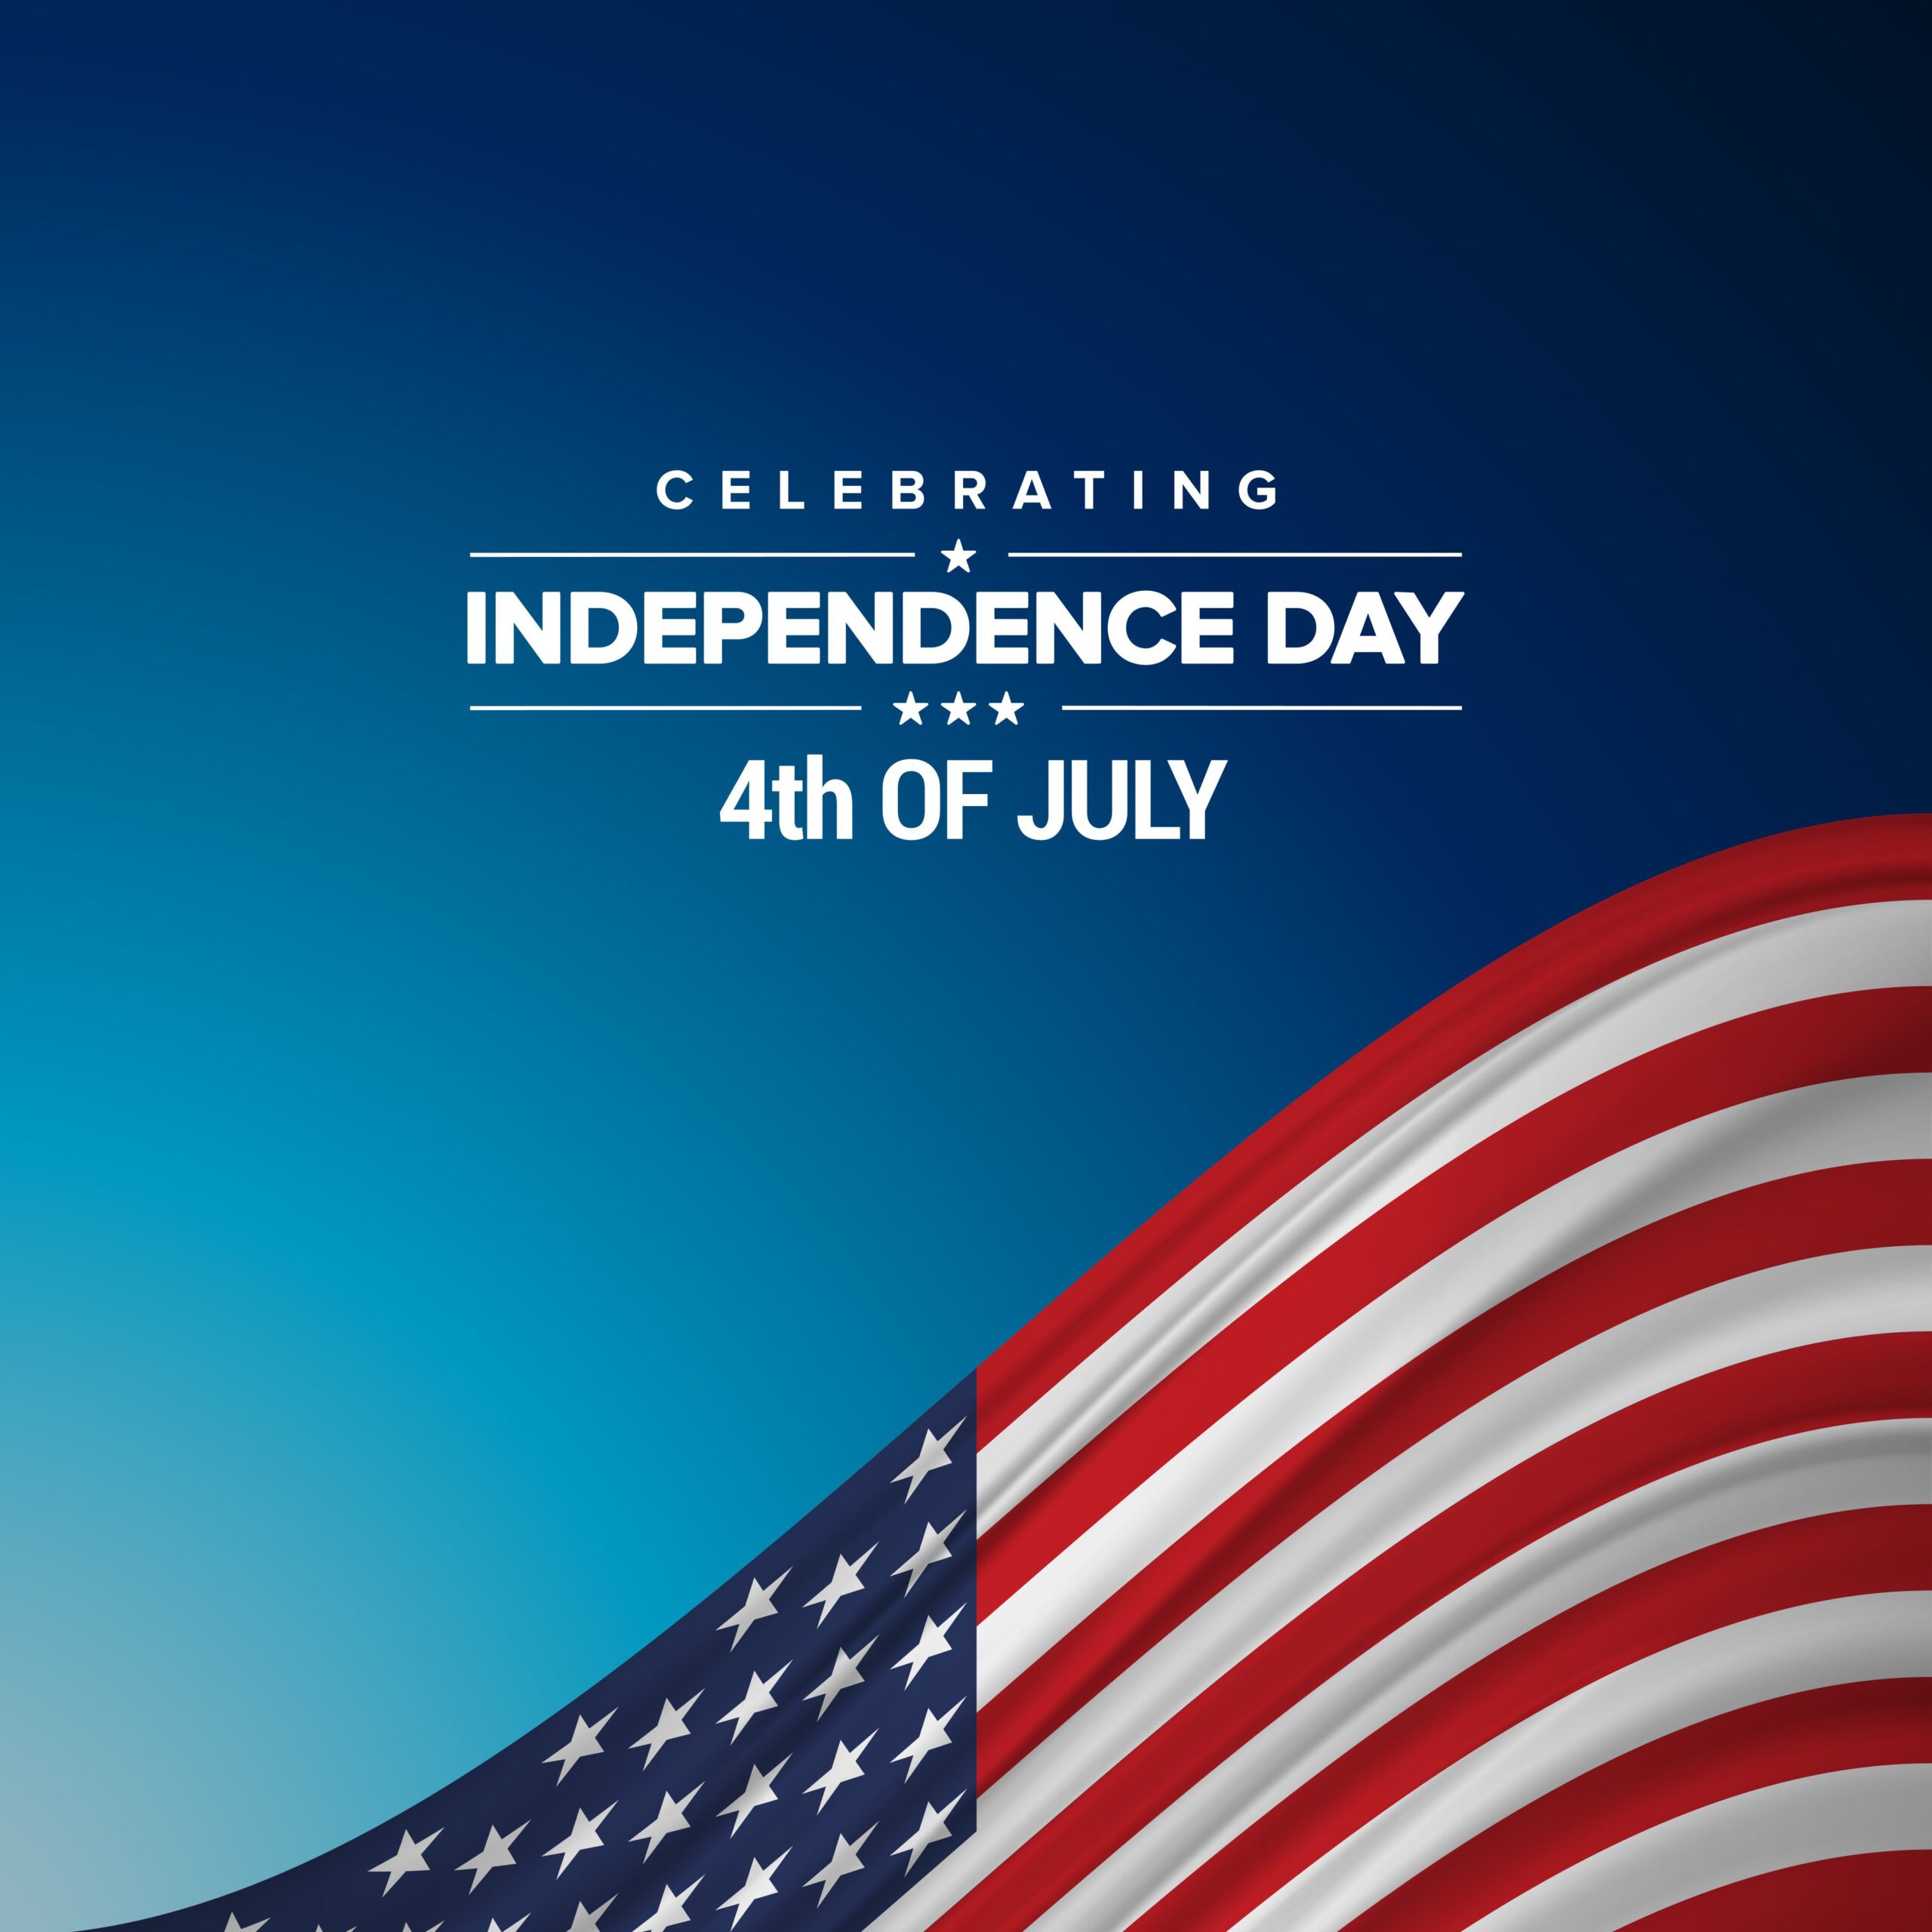 Happy 4th Of July 2022 Image & Photo Free Download